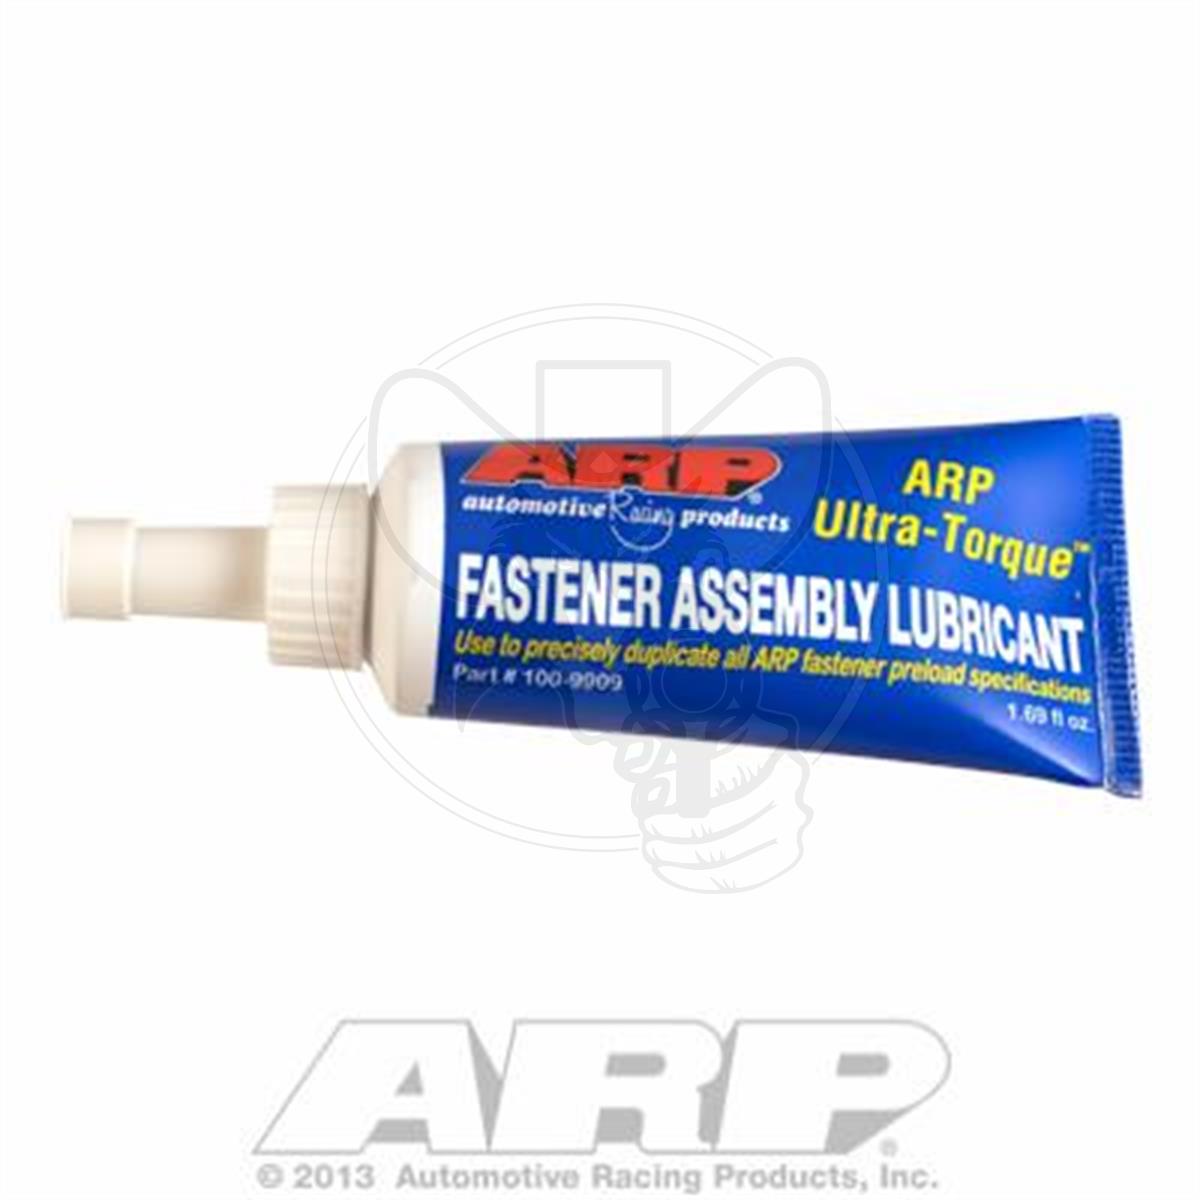 ARP FASTENER ASSEMBLY LUBRICANT FOR STUDS & NUTS 1.69 OUNCE